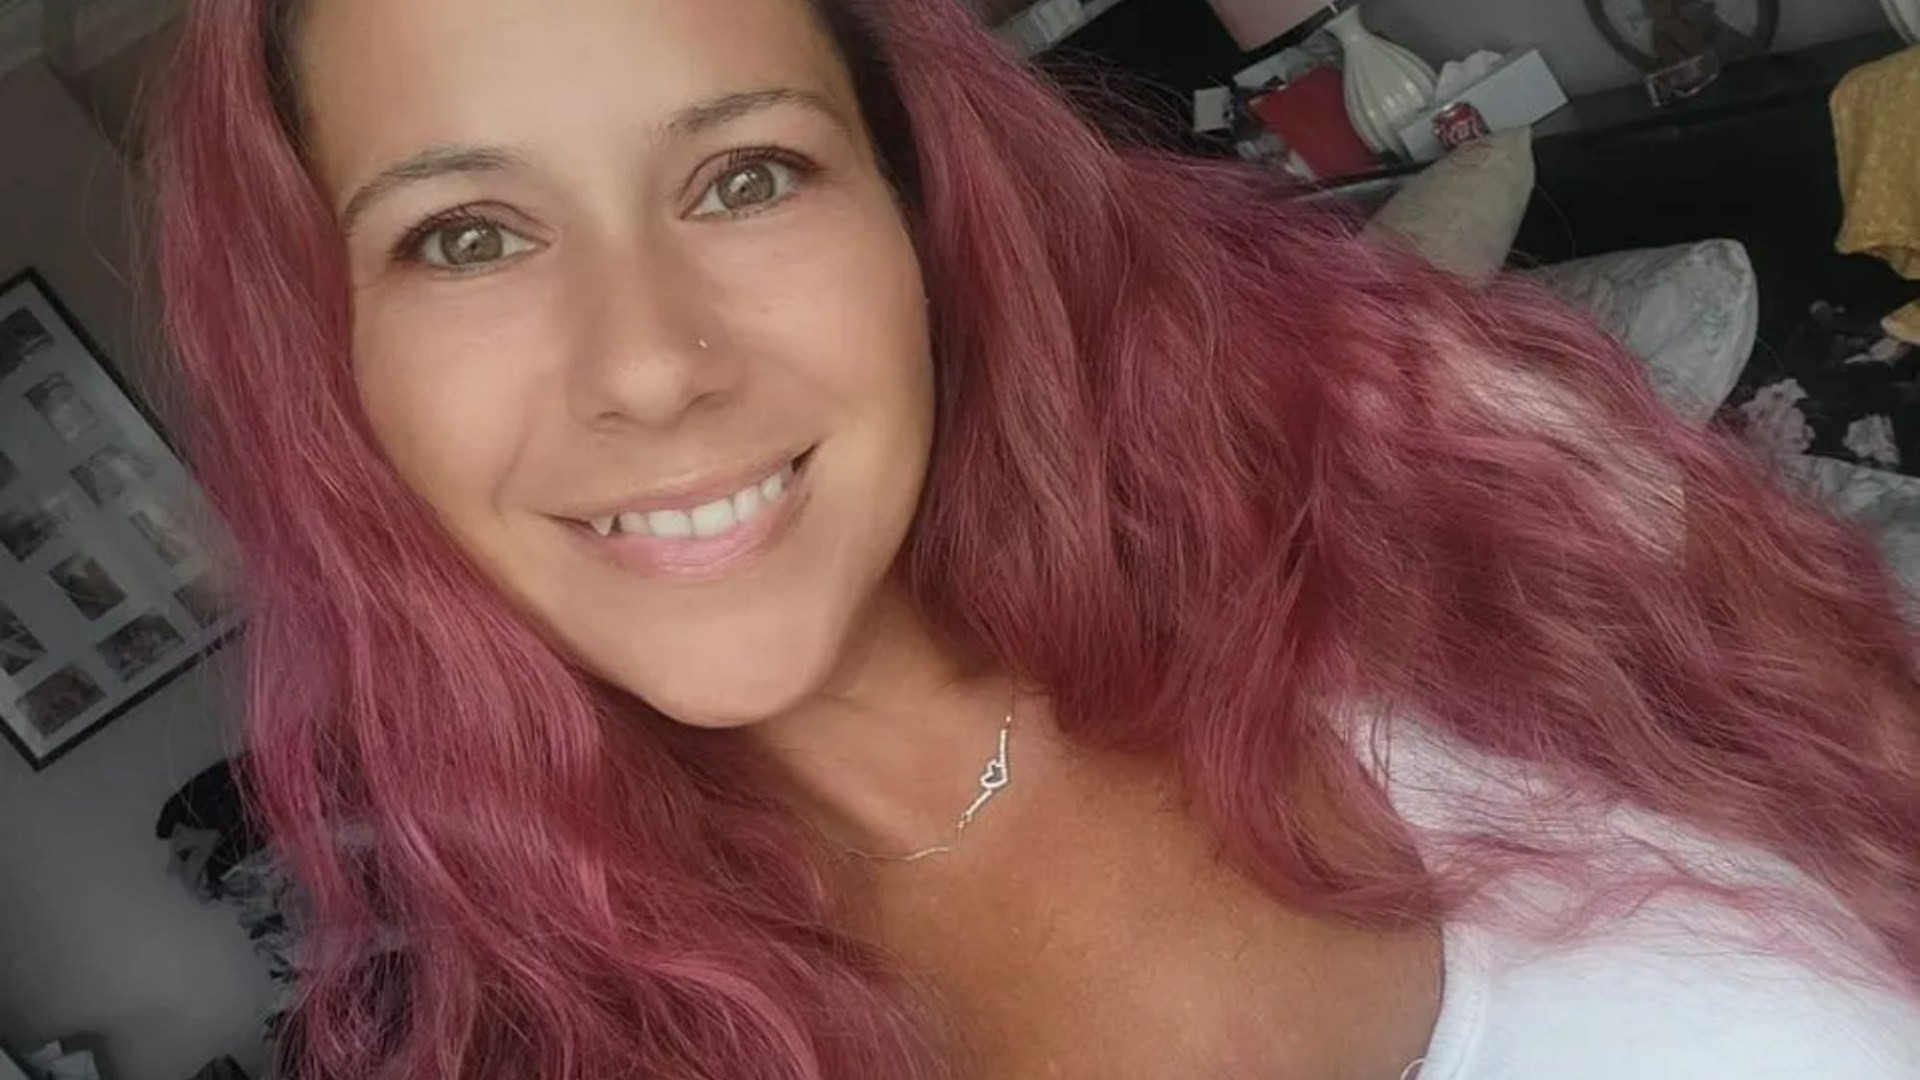 Man Charged in M25 Horror Crash Killing ‘Beautiful’ Mum-of-Eight on 40th Birthday Holiday – Justice Served